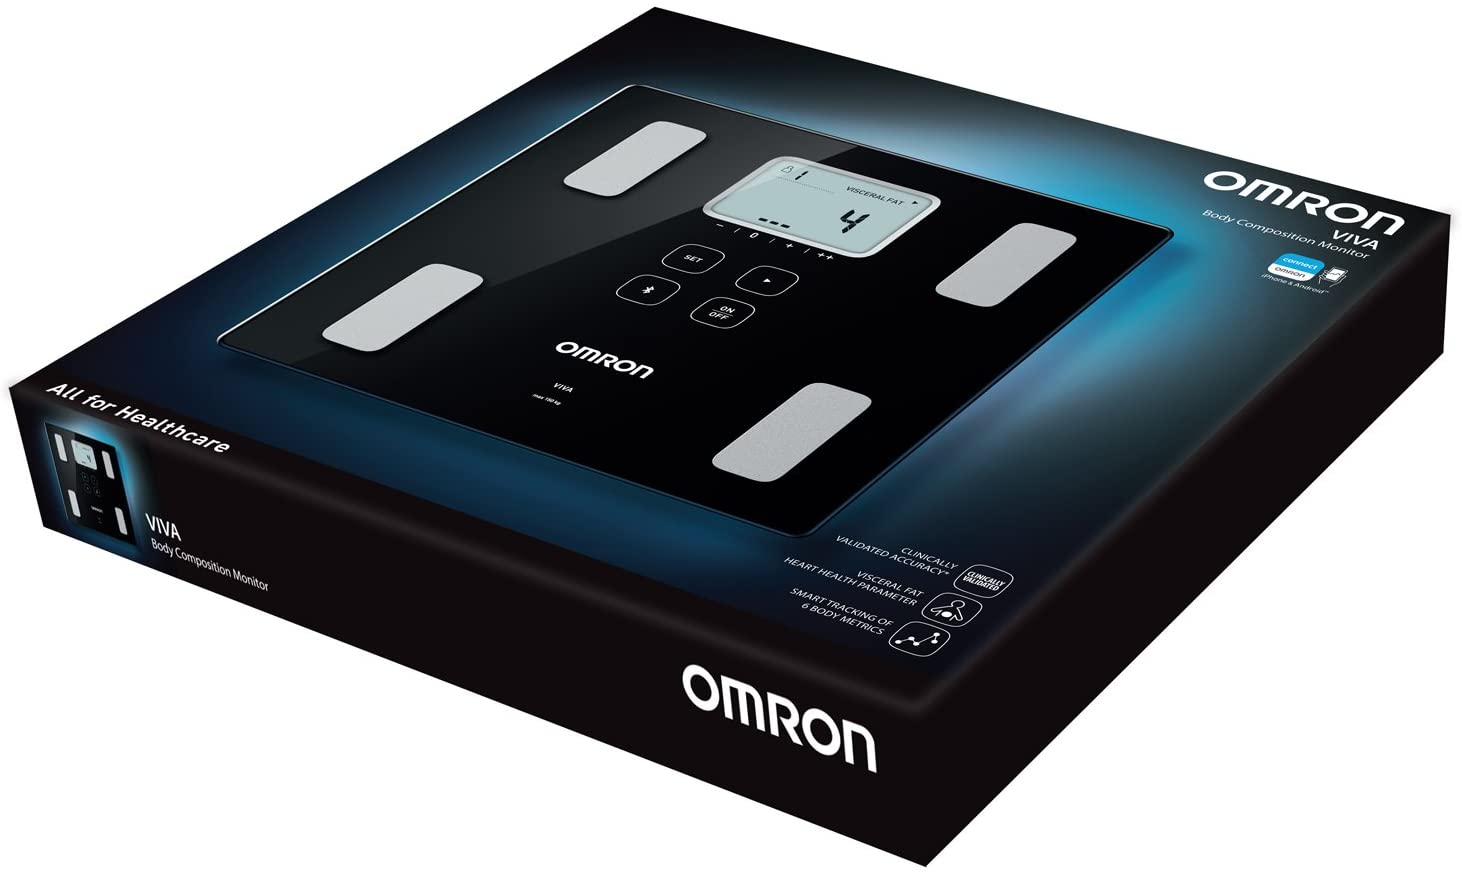 OMRON VIVA, the intelligent impedance meter for OMRON VIVA is an in